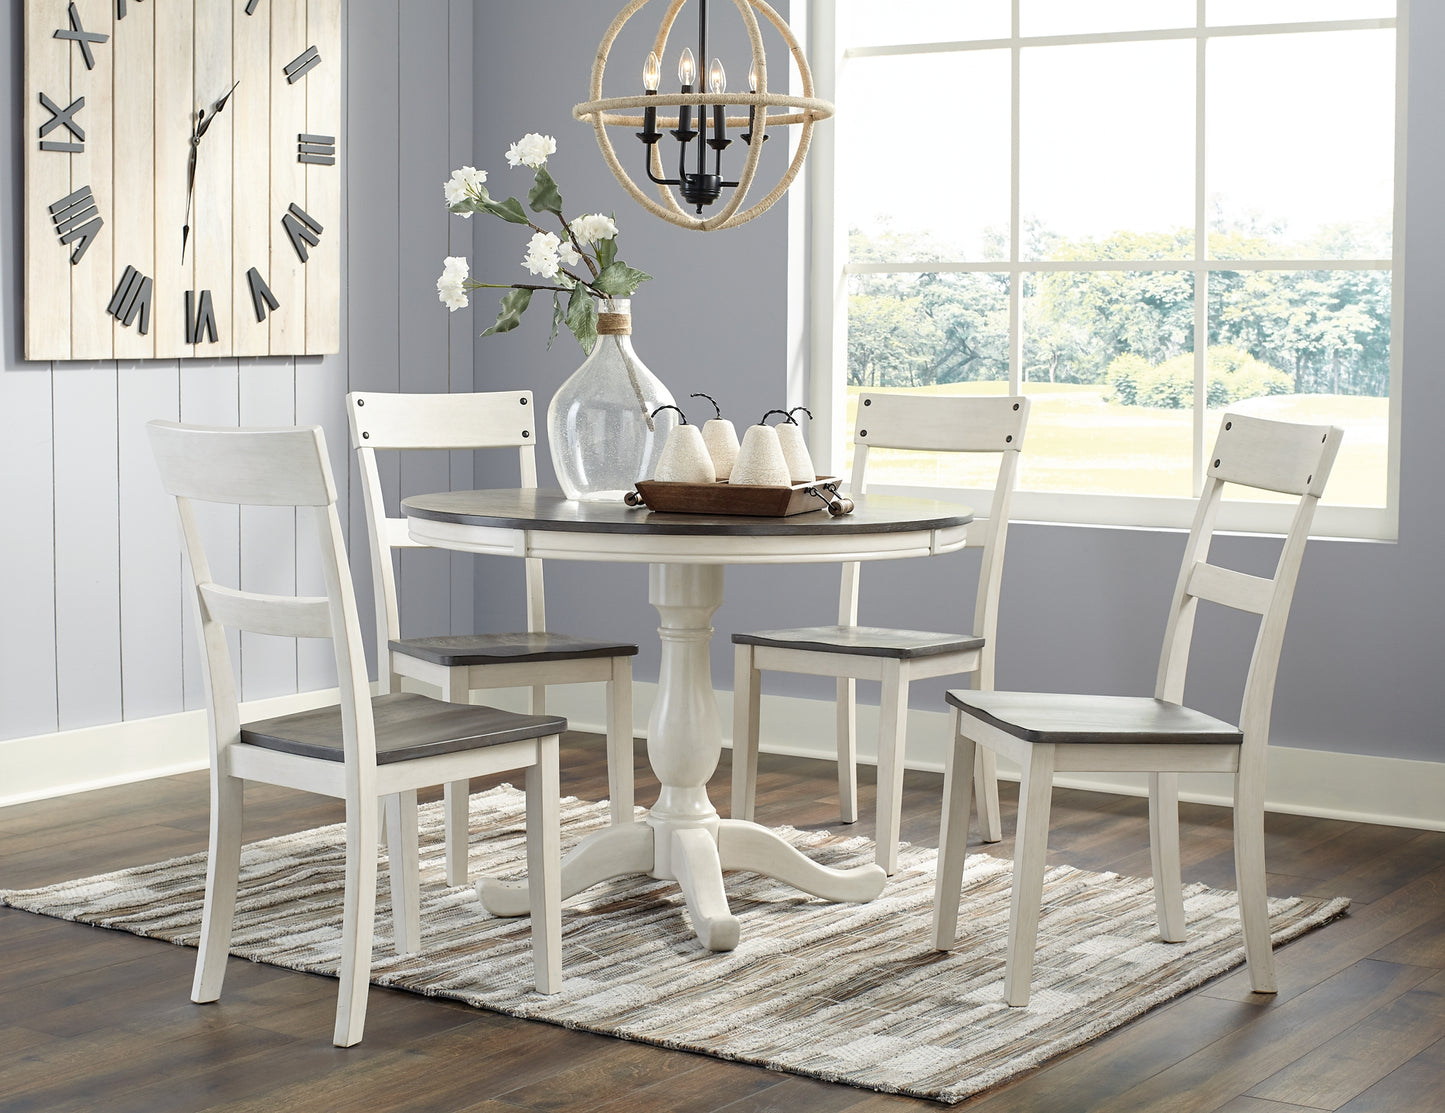 Nelling Dining Table and 4 Chairs JB's Furniture  Home Furniture, Home Decor, Furniture Store